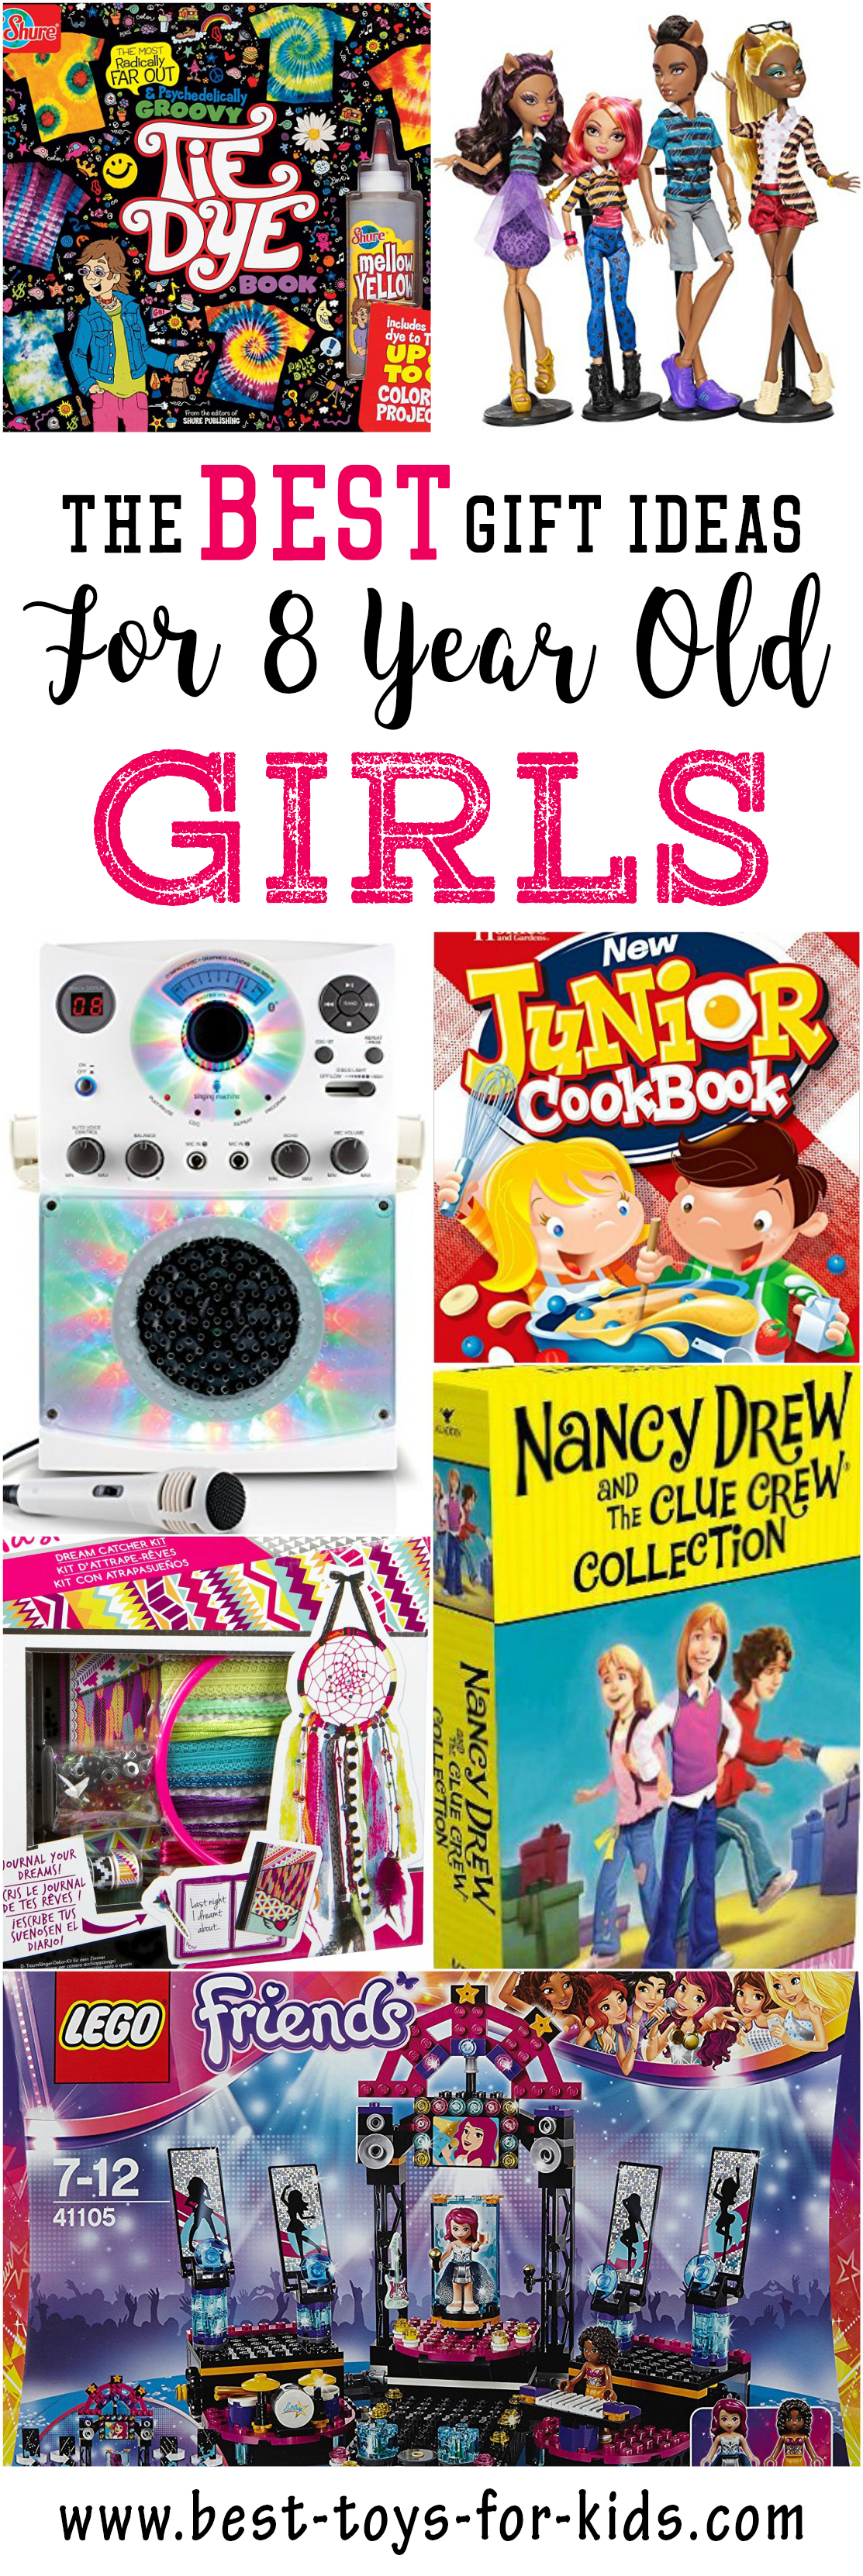 Best Toys for 8 Year Old Girls - Gifts for 8 Year Old Girls